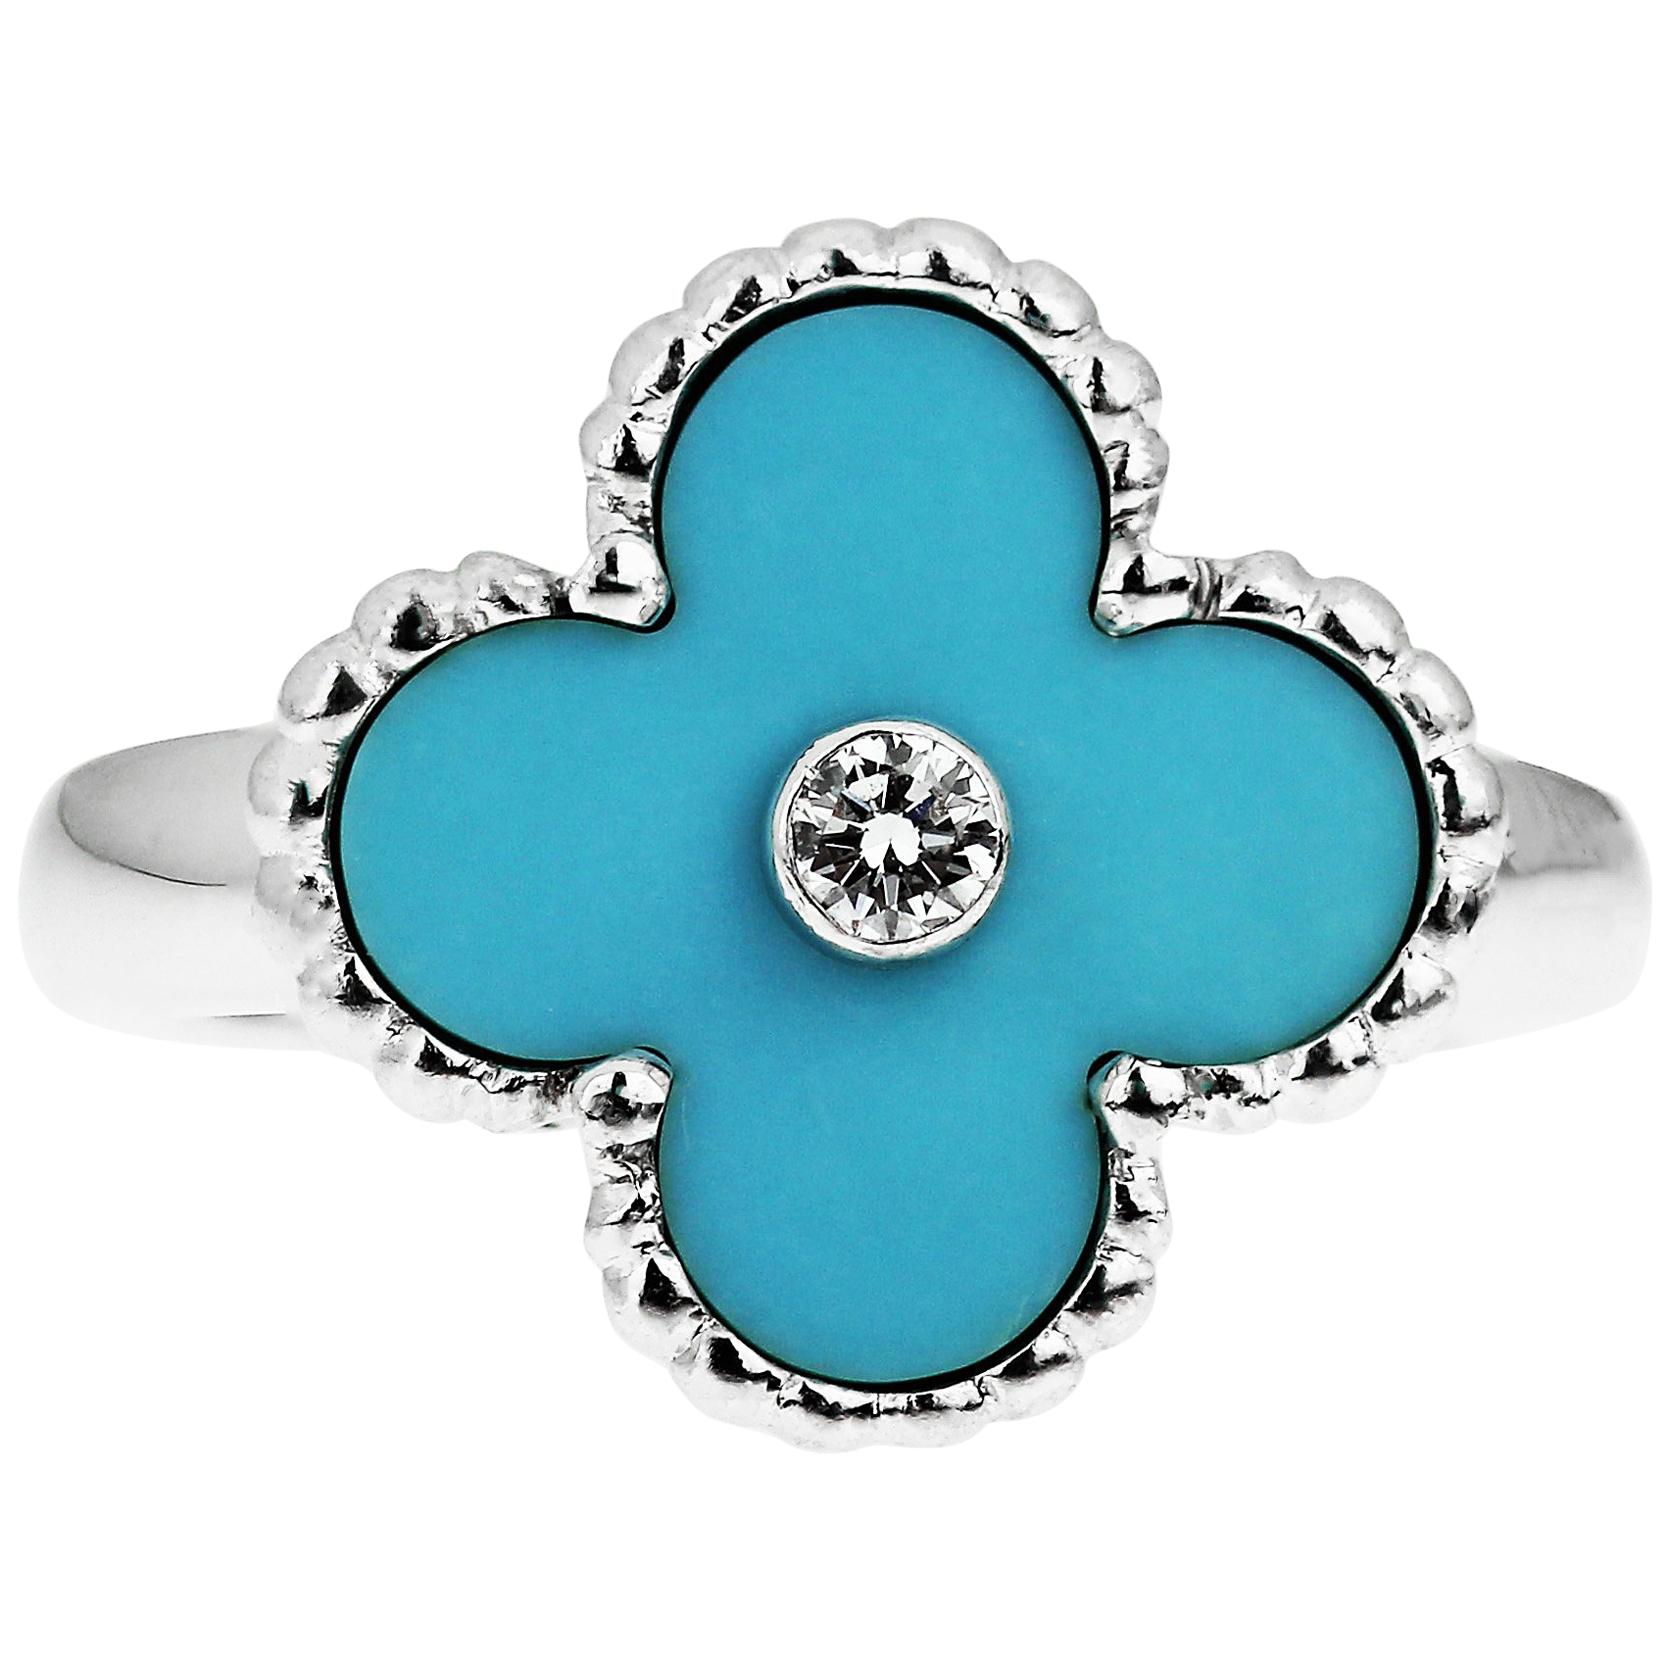 Van Cleef & Arpels VCA Vintage Alhambra ring with Turquoise and Diamond Retaired